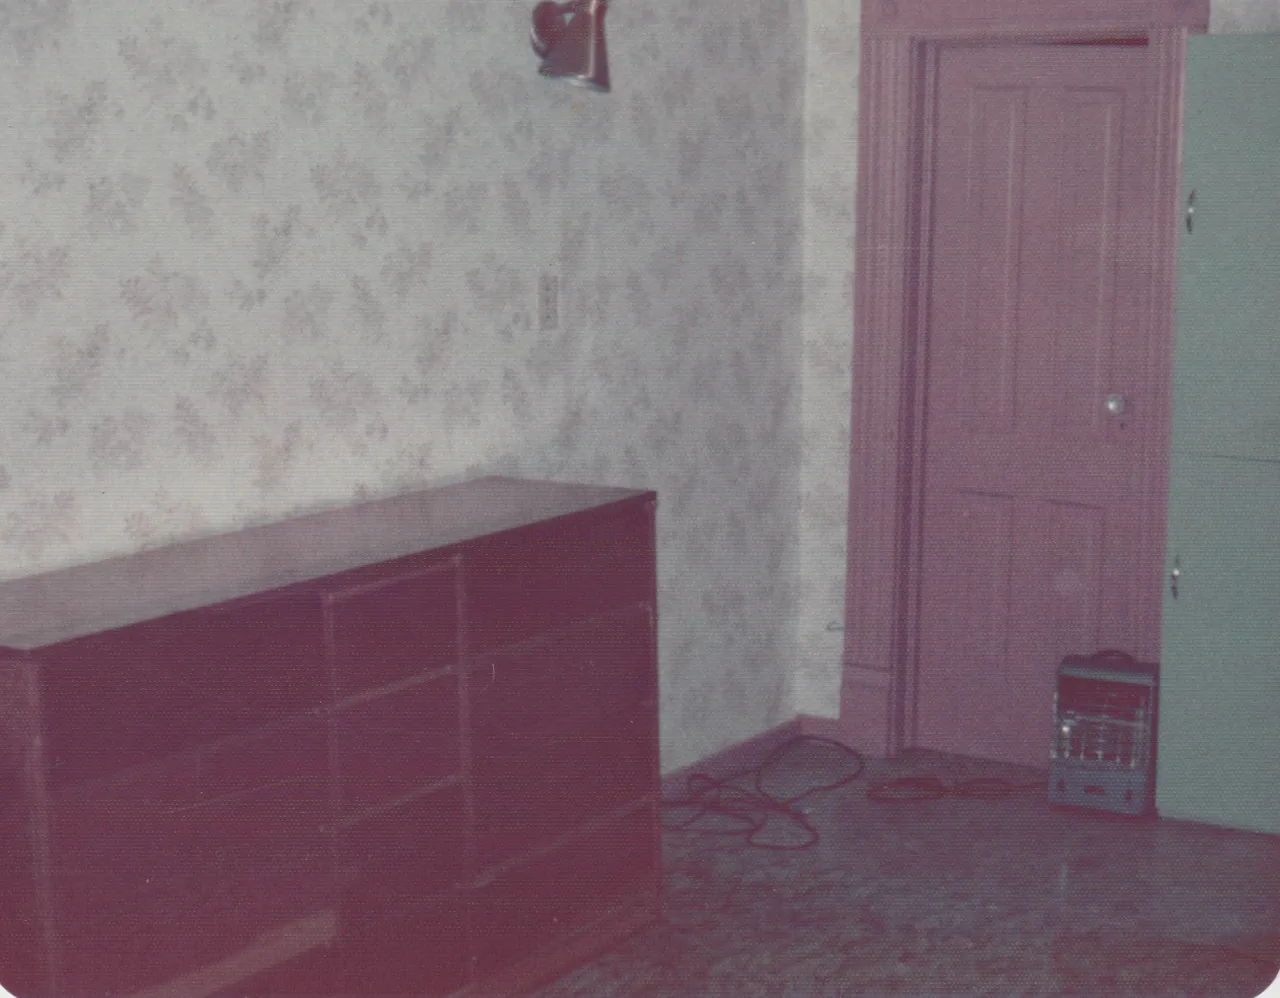 1974-08-31 - Saturday - Room, door, drawer, an exact date in August of 1974, 1pic.png